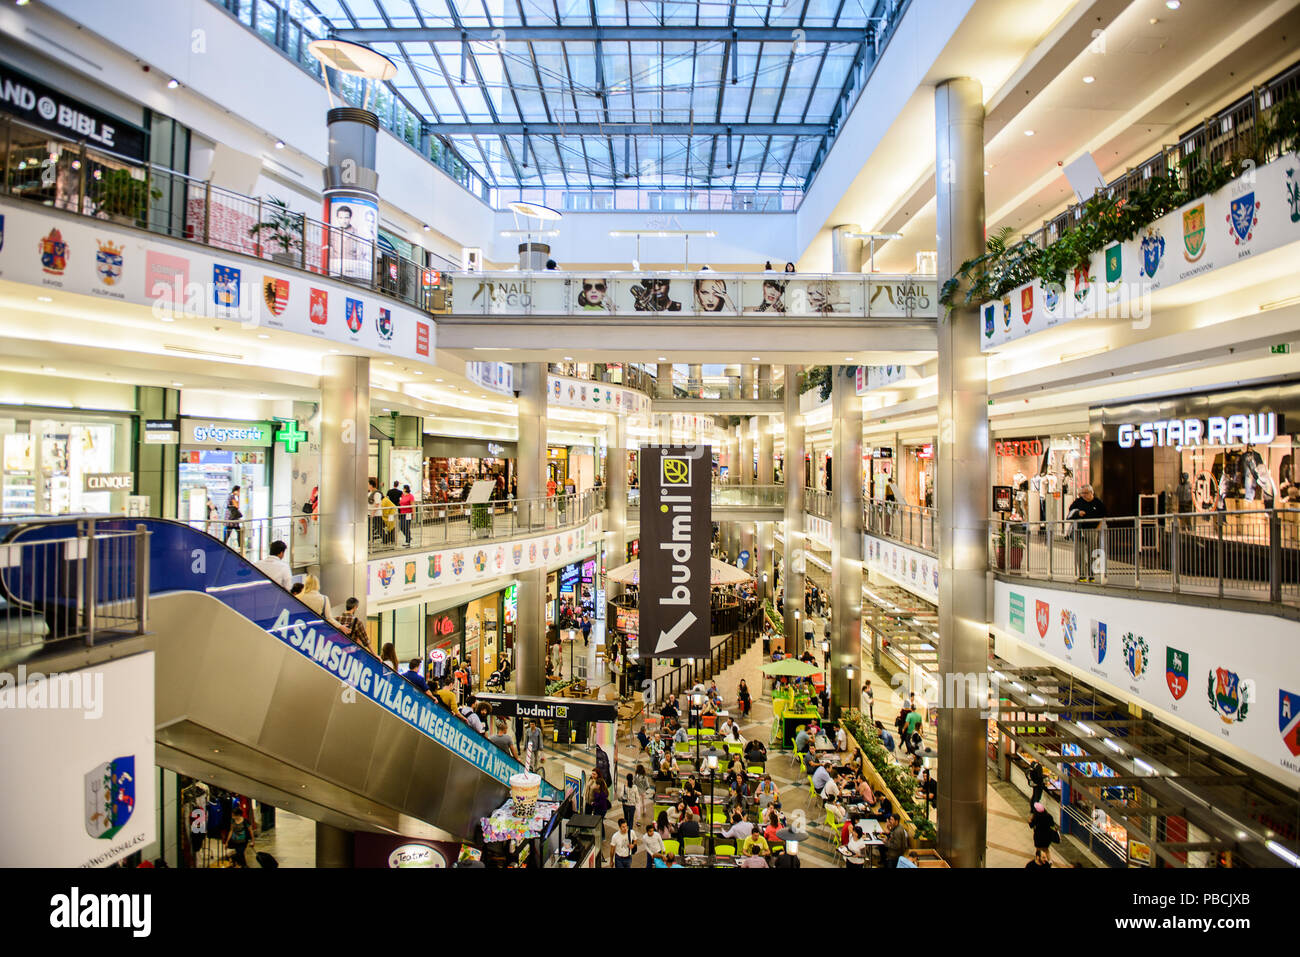 BUDAPEST, HUNGARY - AUG 27, 2014: Interior of West End City Center, a  shopping centre in Budapest, Hungary. it is the former largest mall in  Central Stock Photo - Alamy